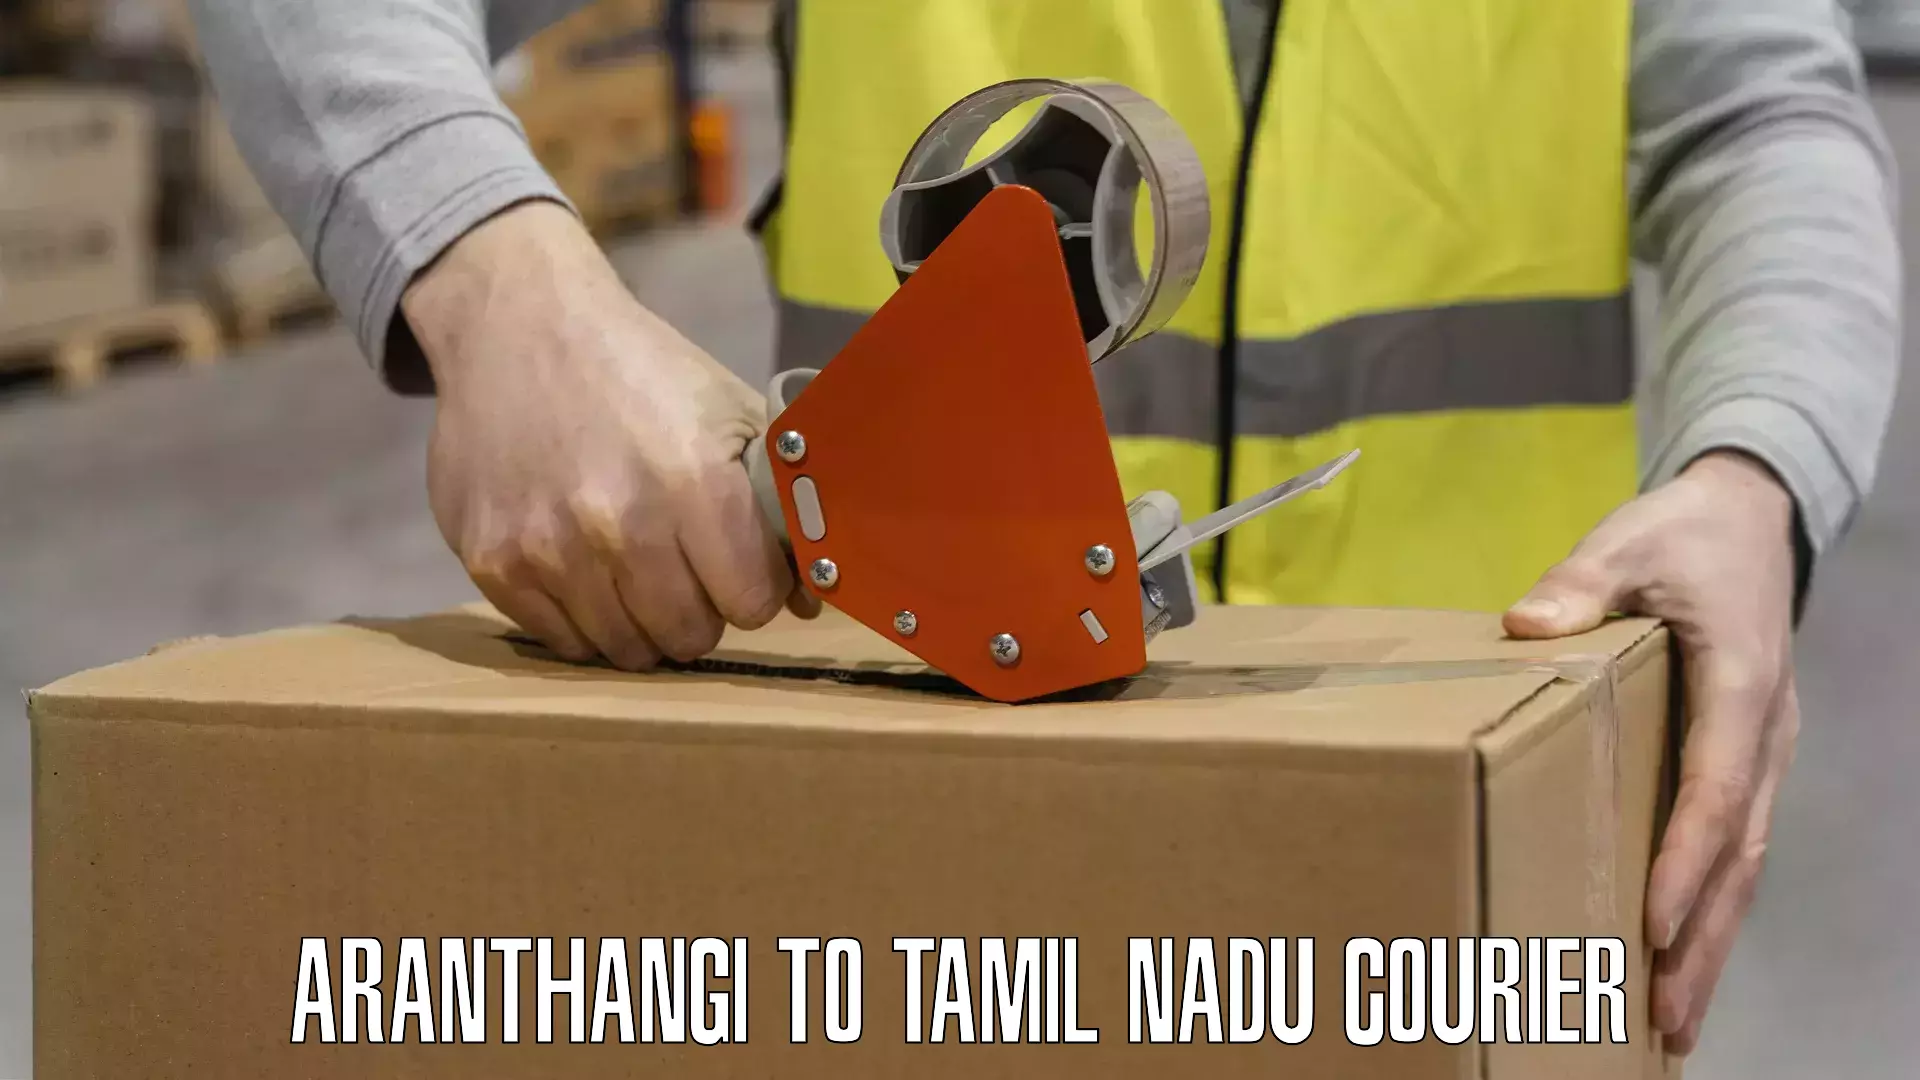 Quick courier services Aranthangi to Ennore Port Chennai